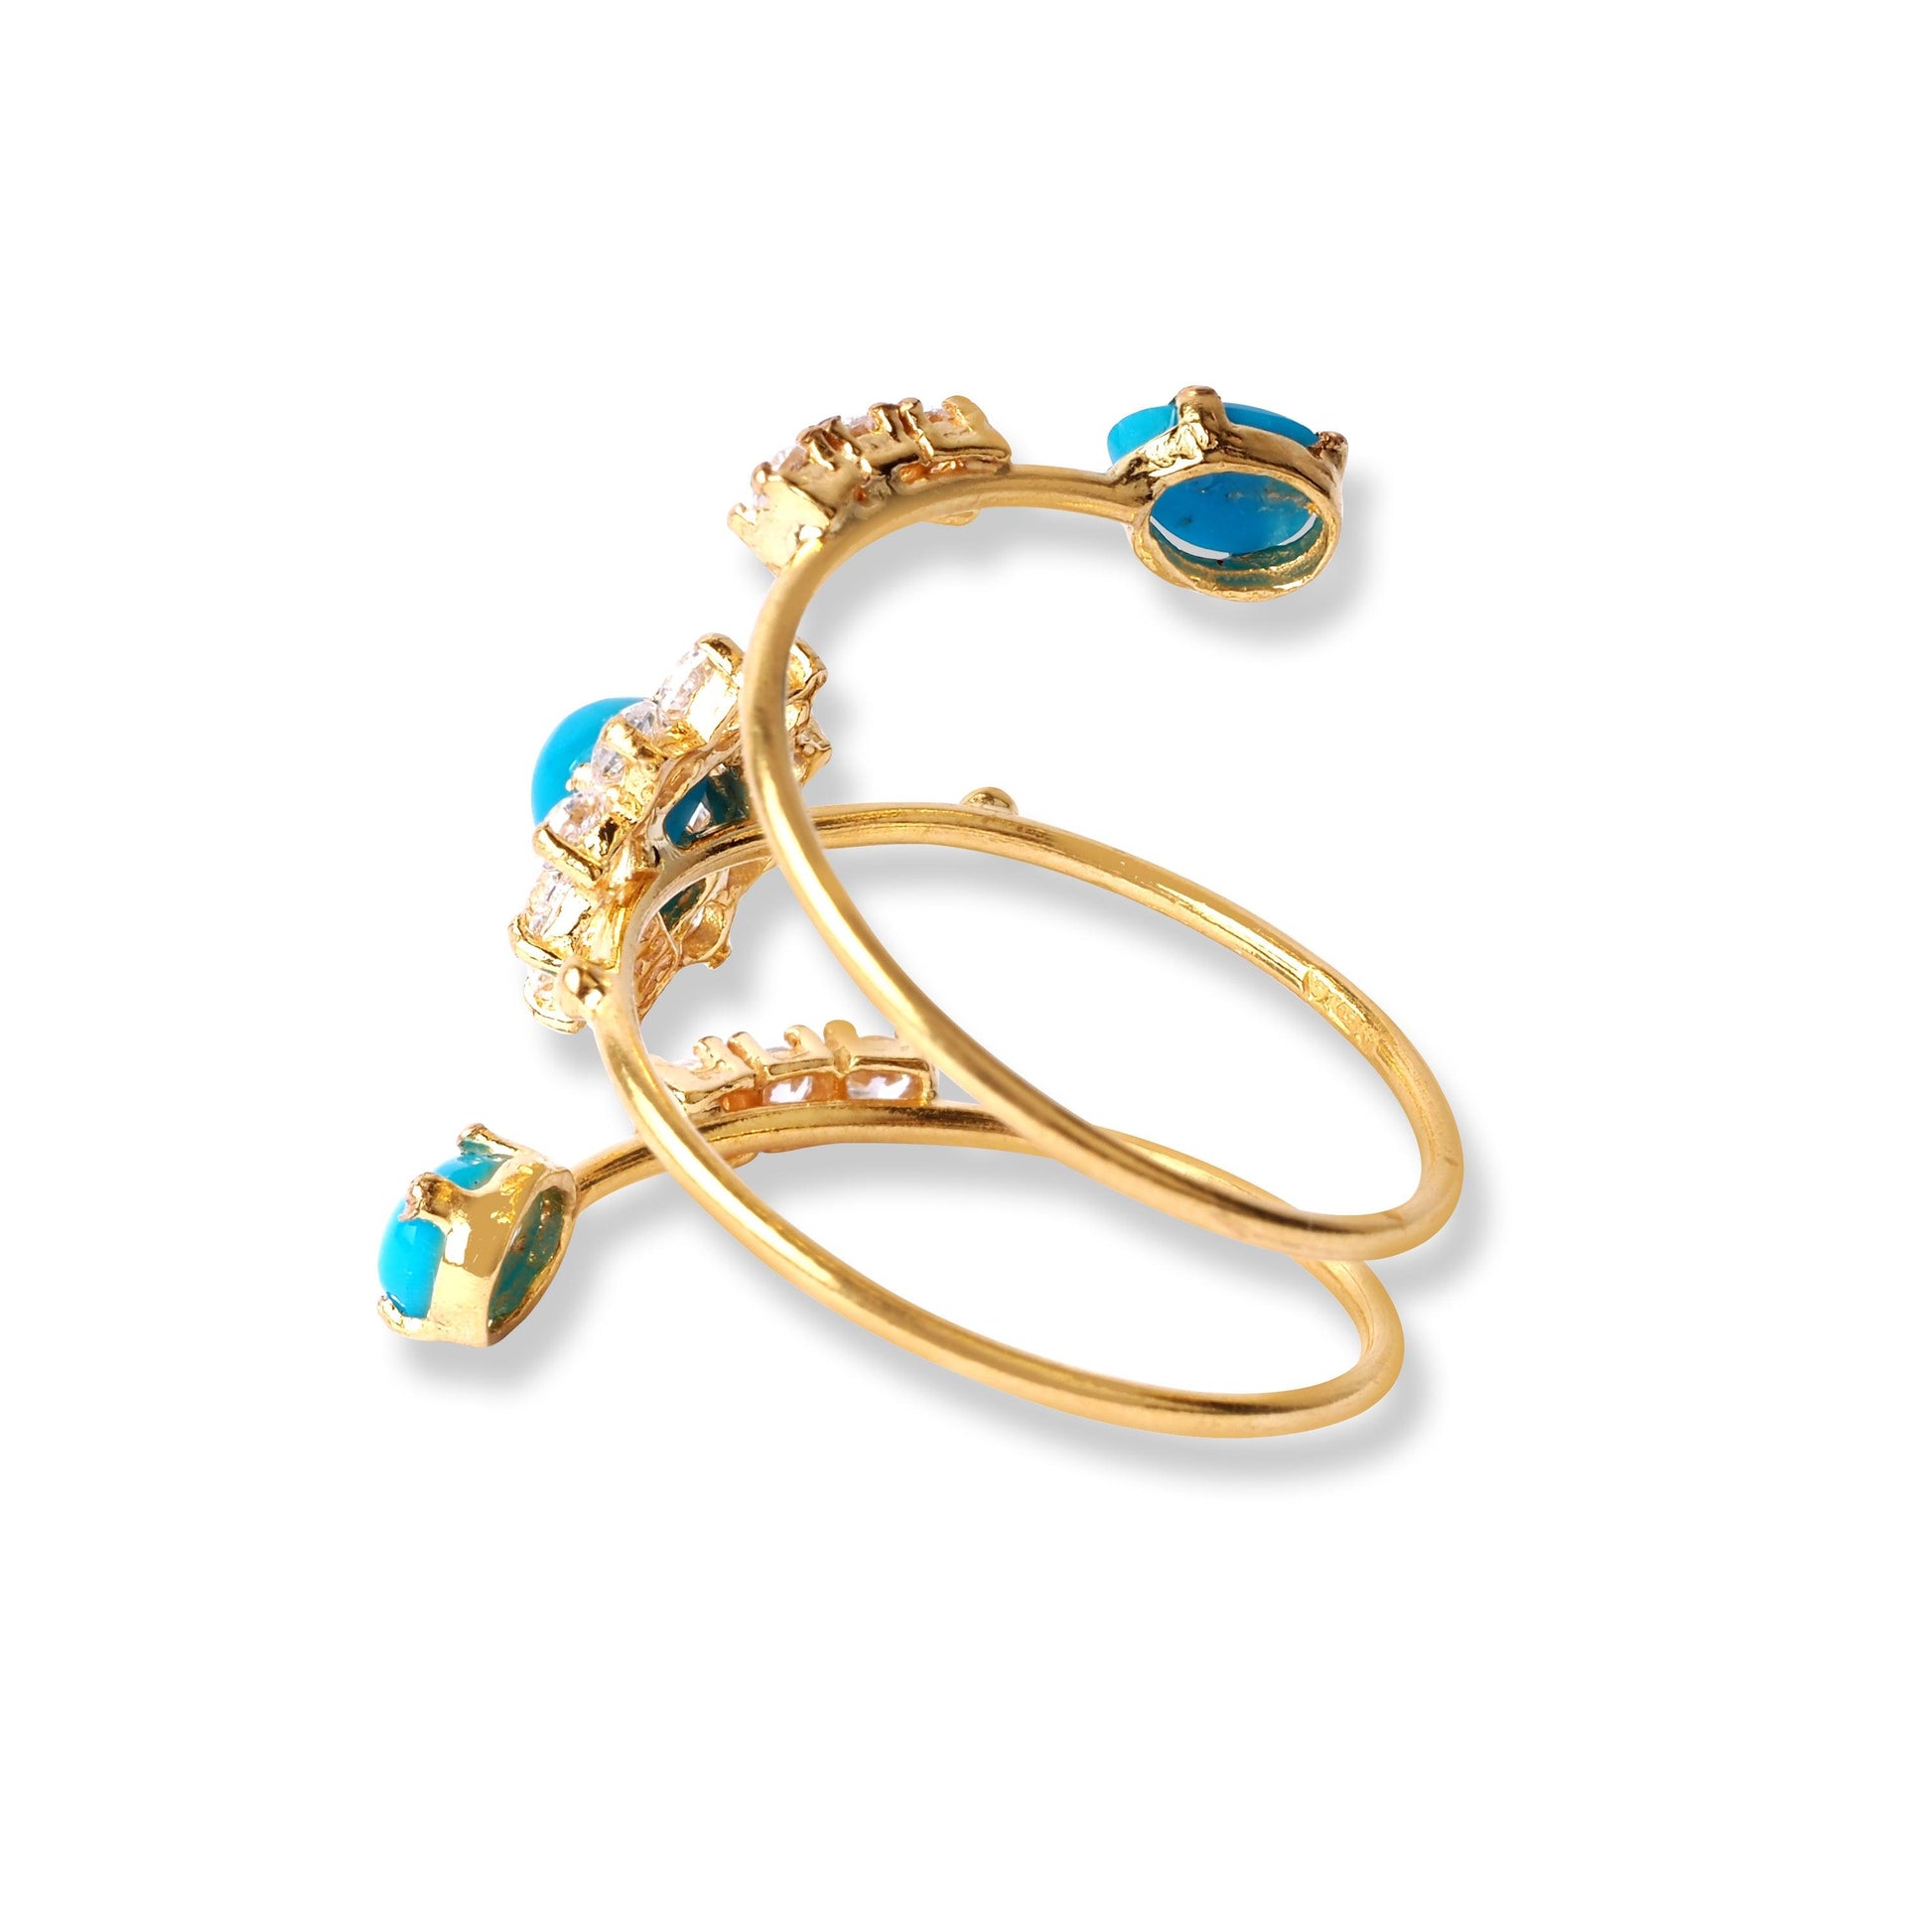 22ct Gold Spiral Ring With Cubic Zirconia and Turquoise Stones (3.3g) LR-6590 - Minar Jewellers